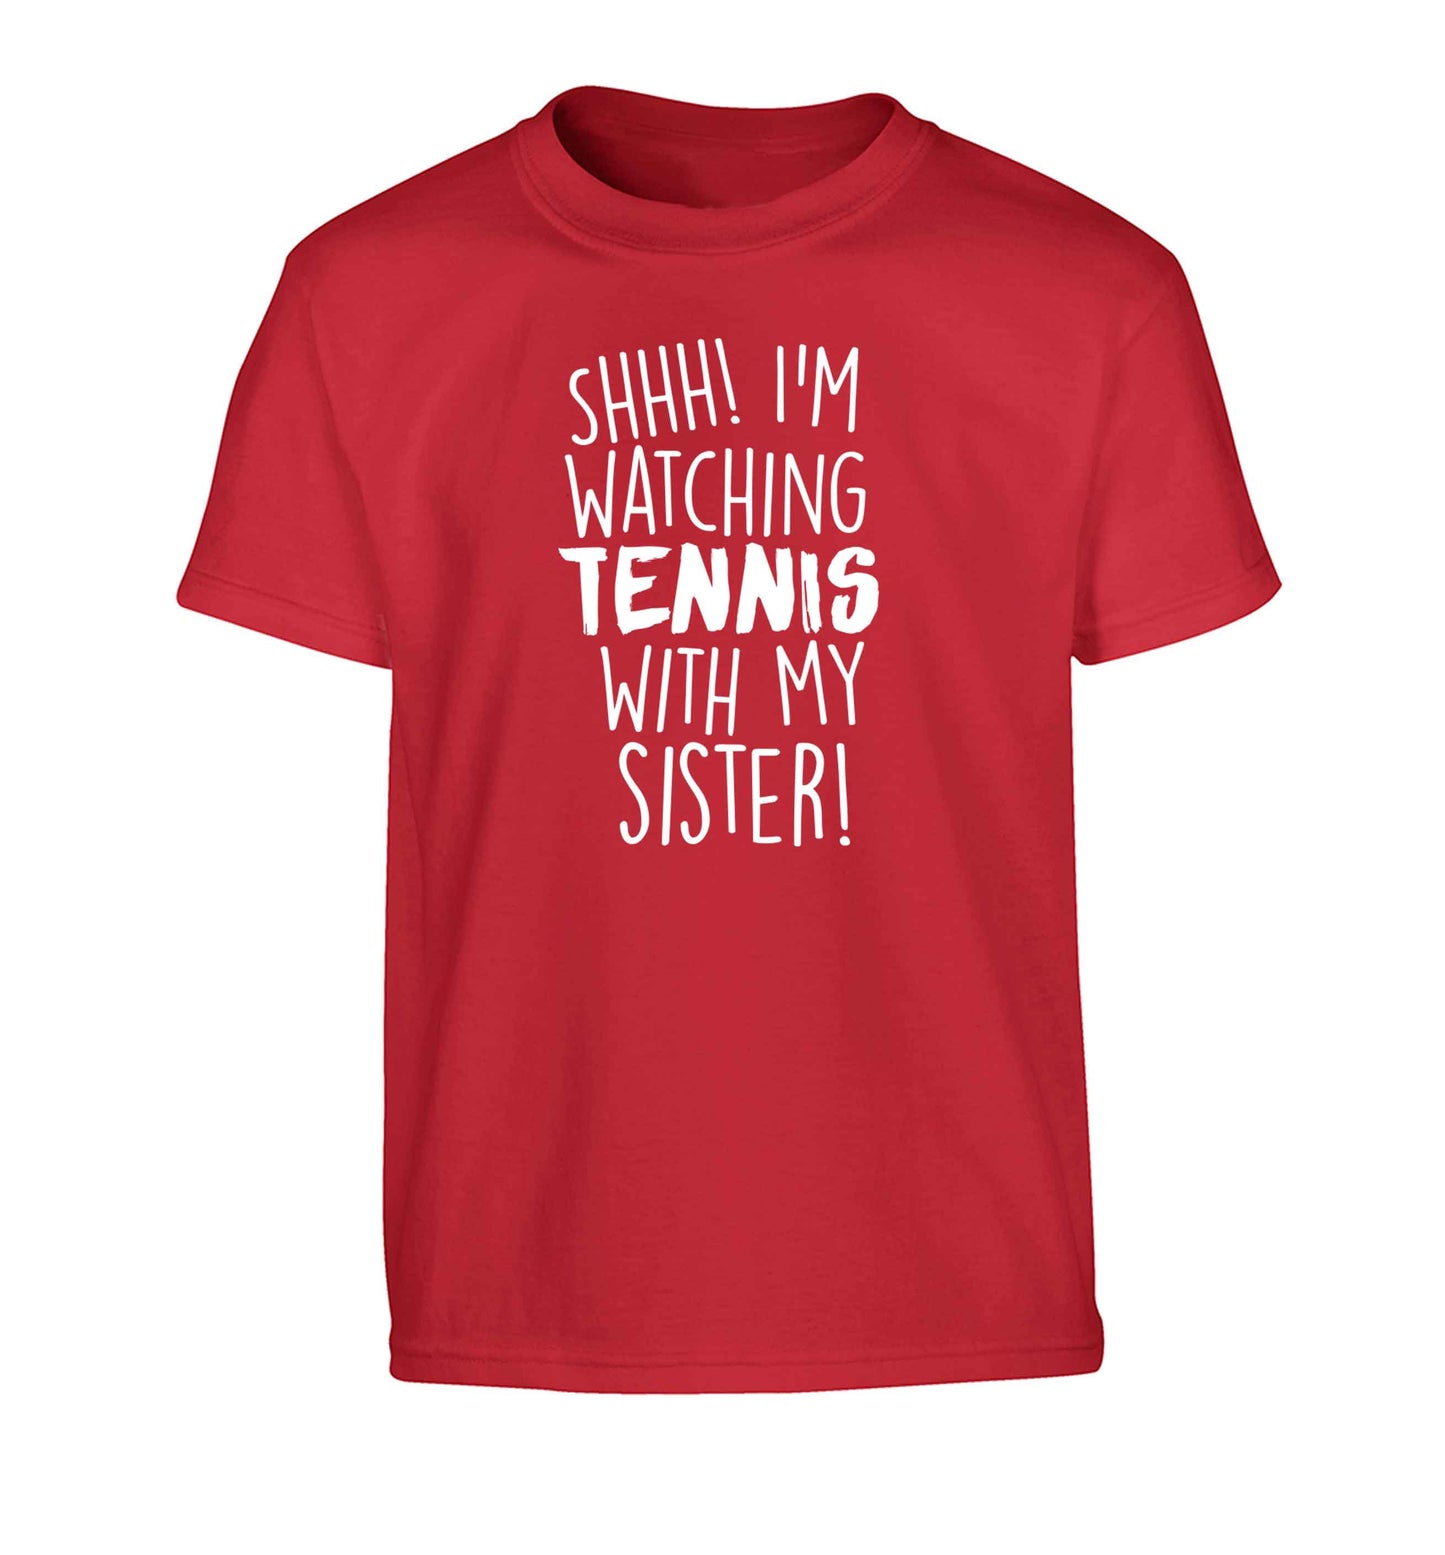 Shh! I'm watching tennis with my sister! Children's red Tshirt 12-13 Years